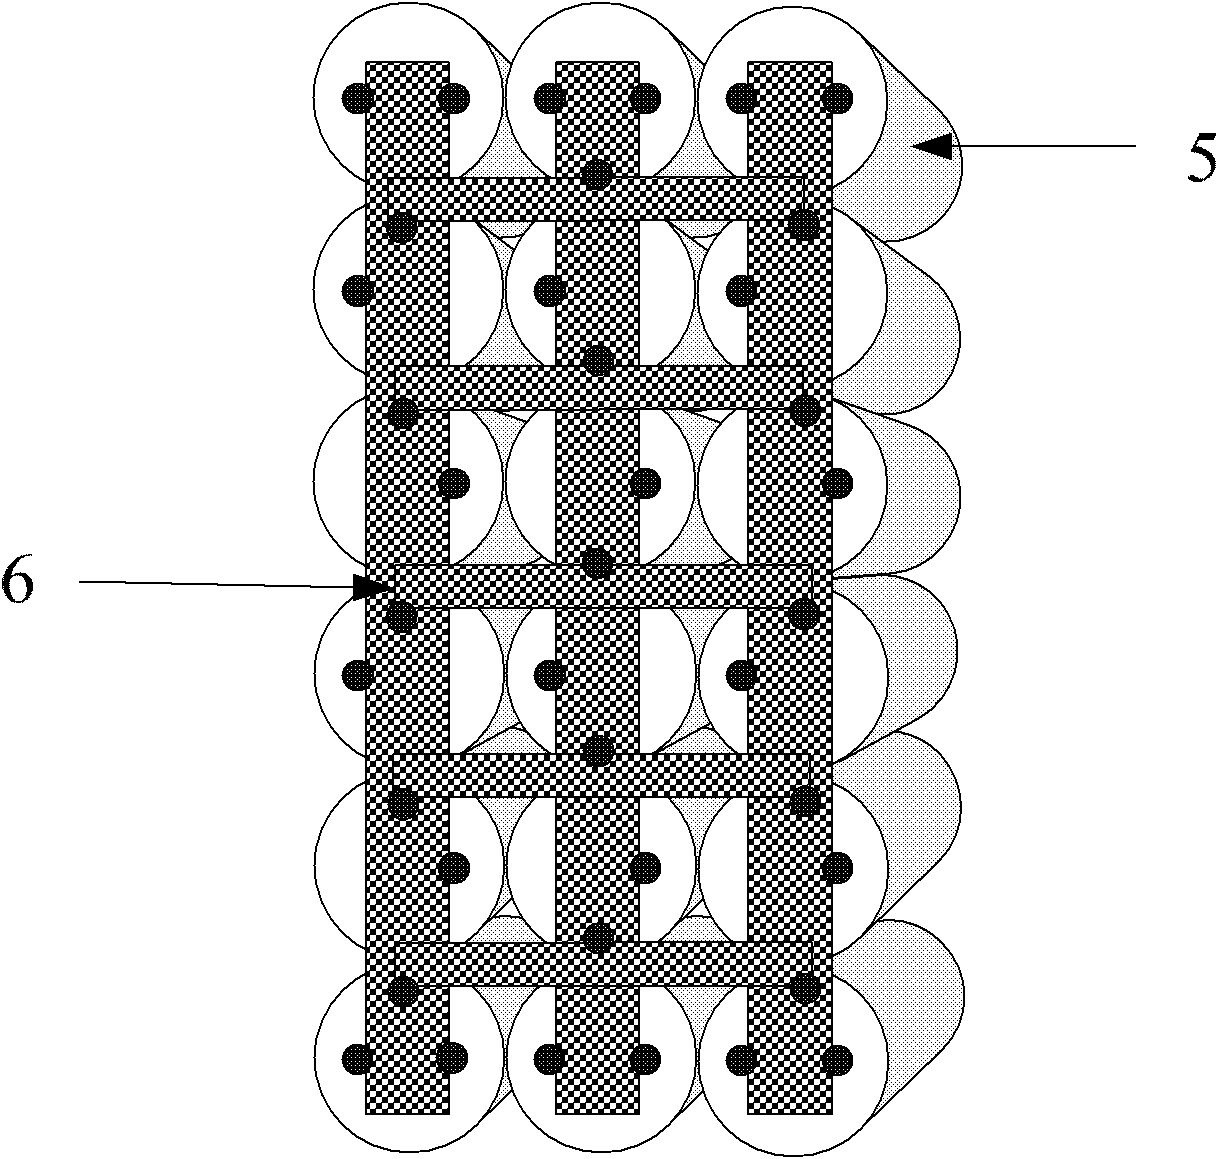 Metallized membrane capacitor assembly